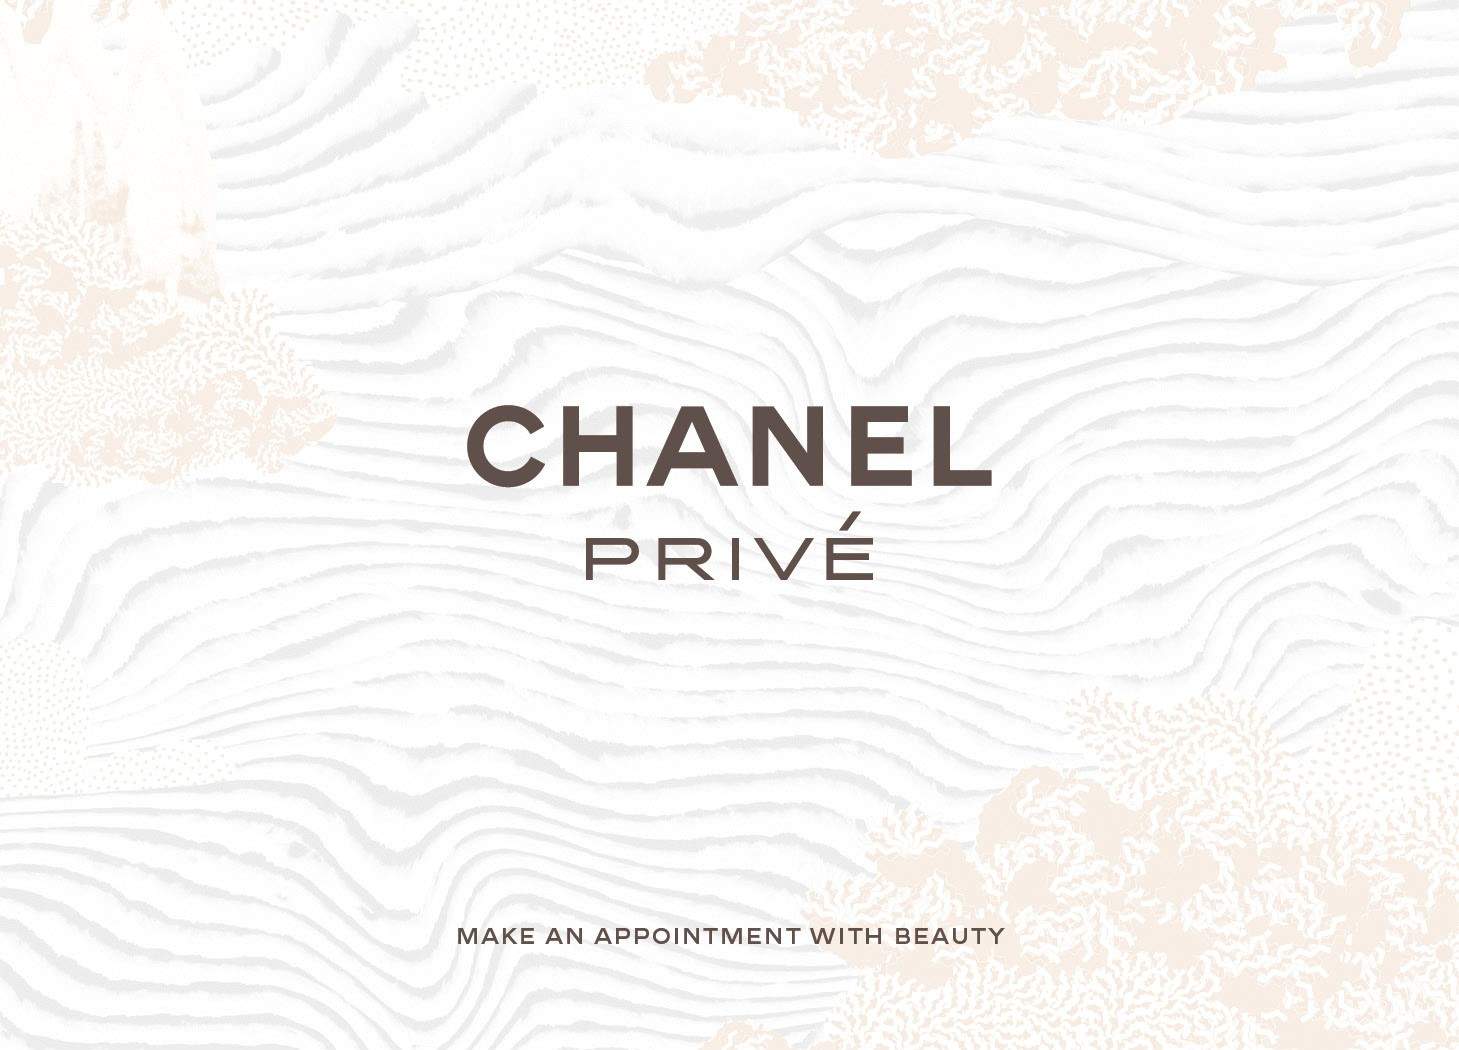 CHANEL PRIVÉ Essential Facial Treatment Experience in Hong Kong - Klook